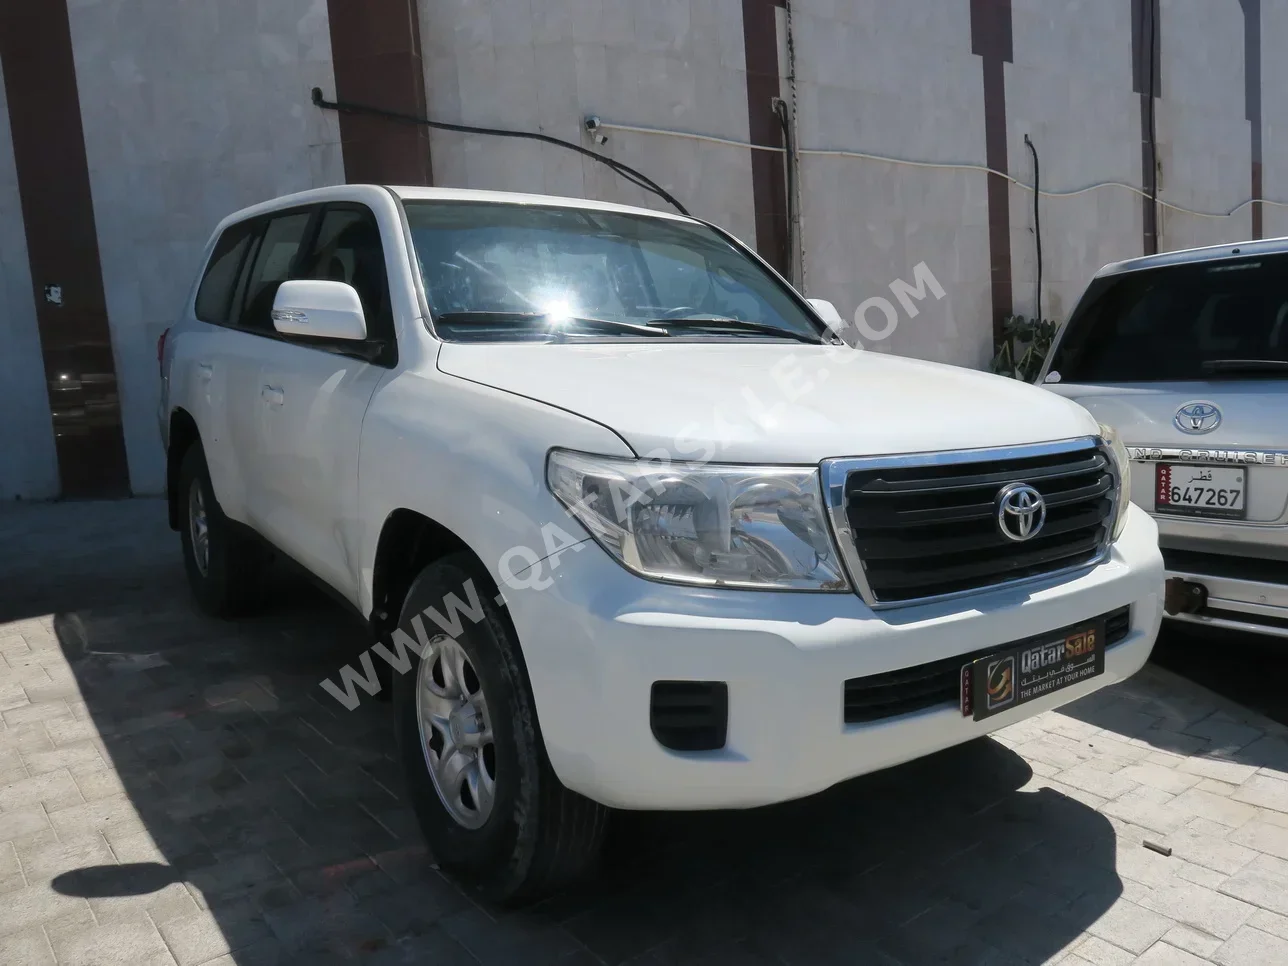 Toyota  Land Cruiser  G  2012  Automatic  28,000 Km  6 Cylinder  Four Wheel Drive (4WD)  SUV  Pearl